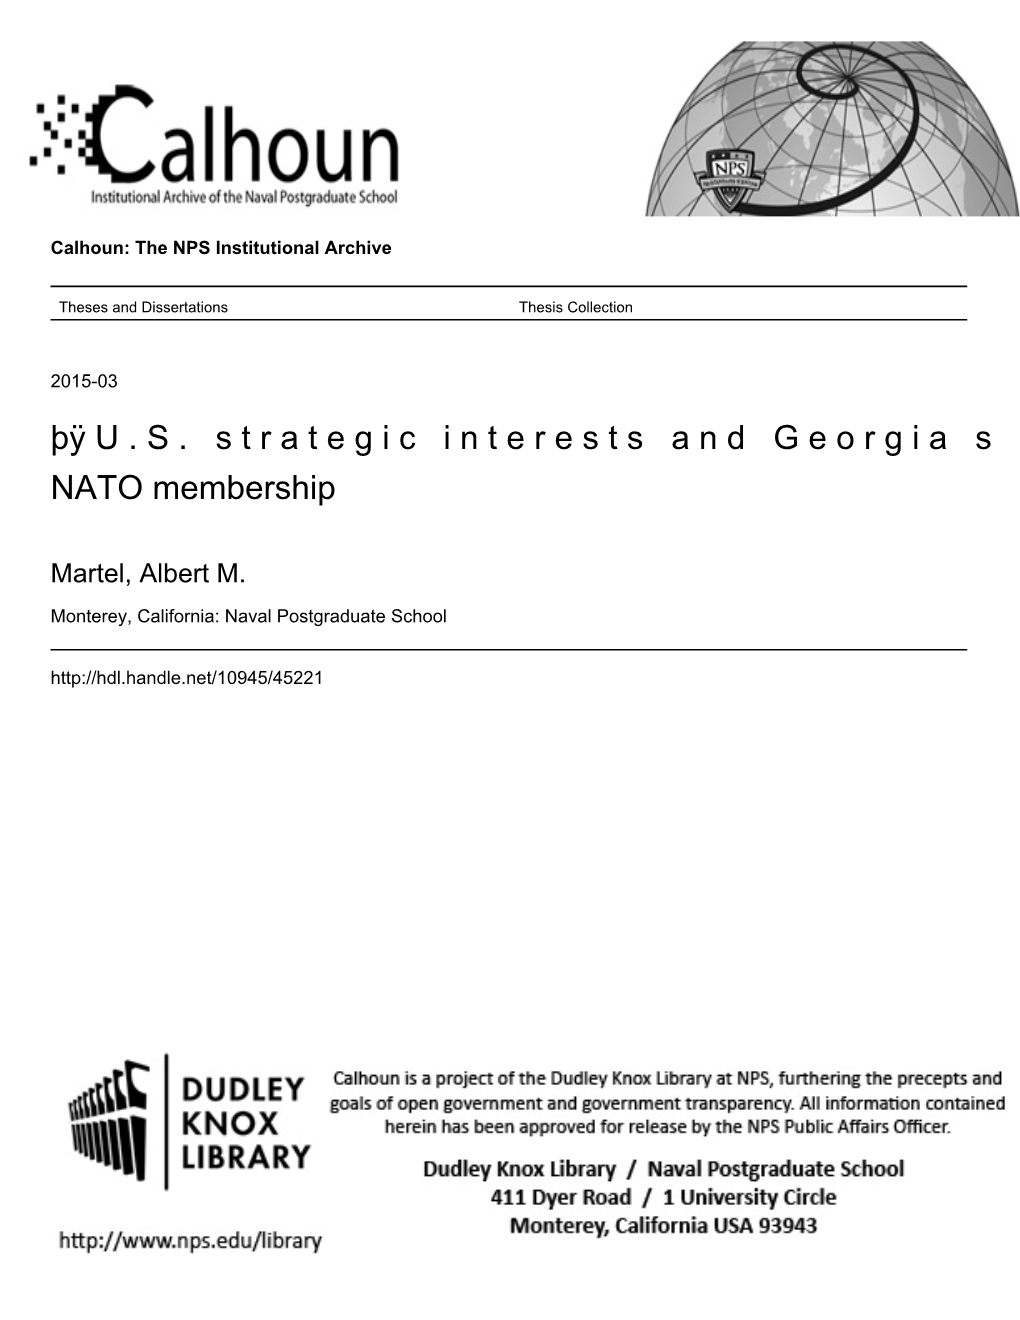 U.S. Strategic Interests and Georgia's Prospects For